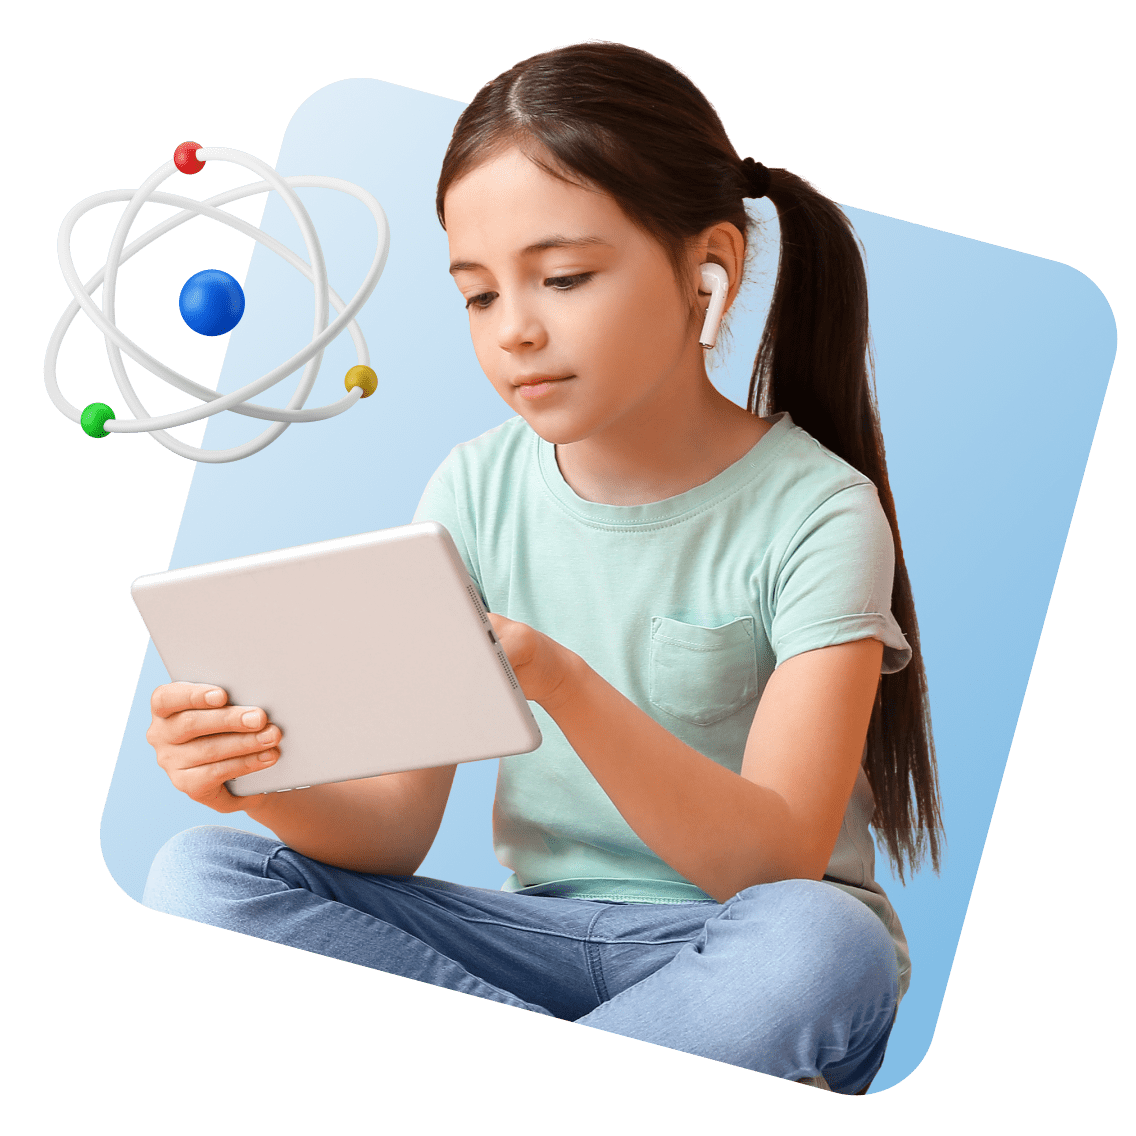 Kentucky Online Schools image 1 (name 3 Young Girl Tablet Airpods Science)